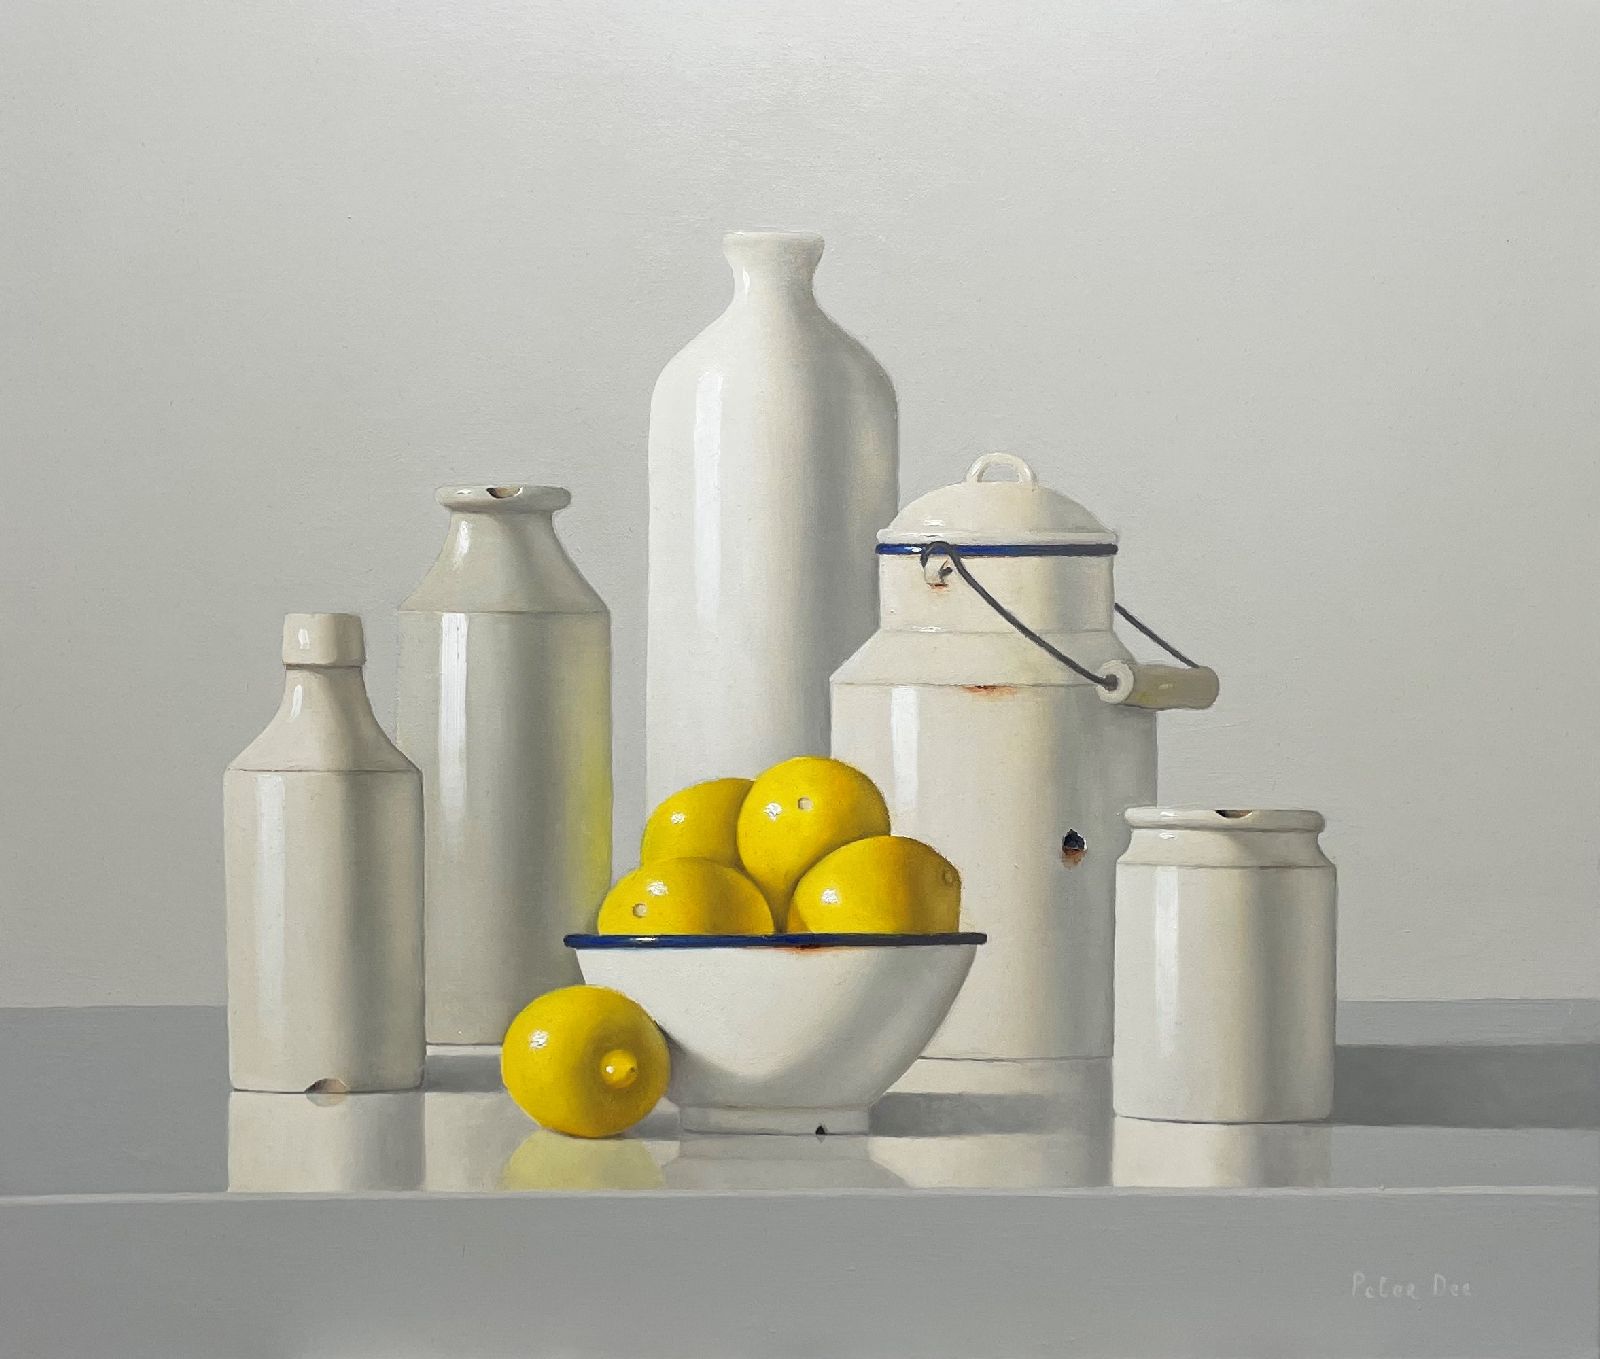 Vintage Stoneware and Enamelware with Lemons by Peter Dee